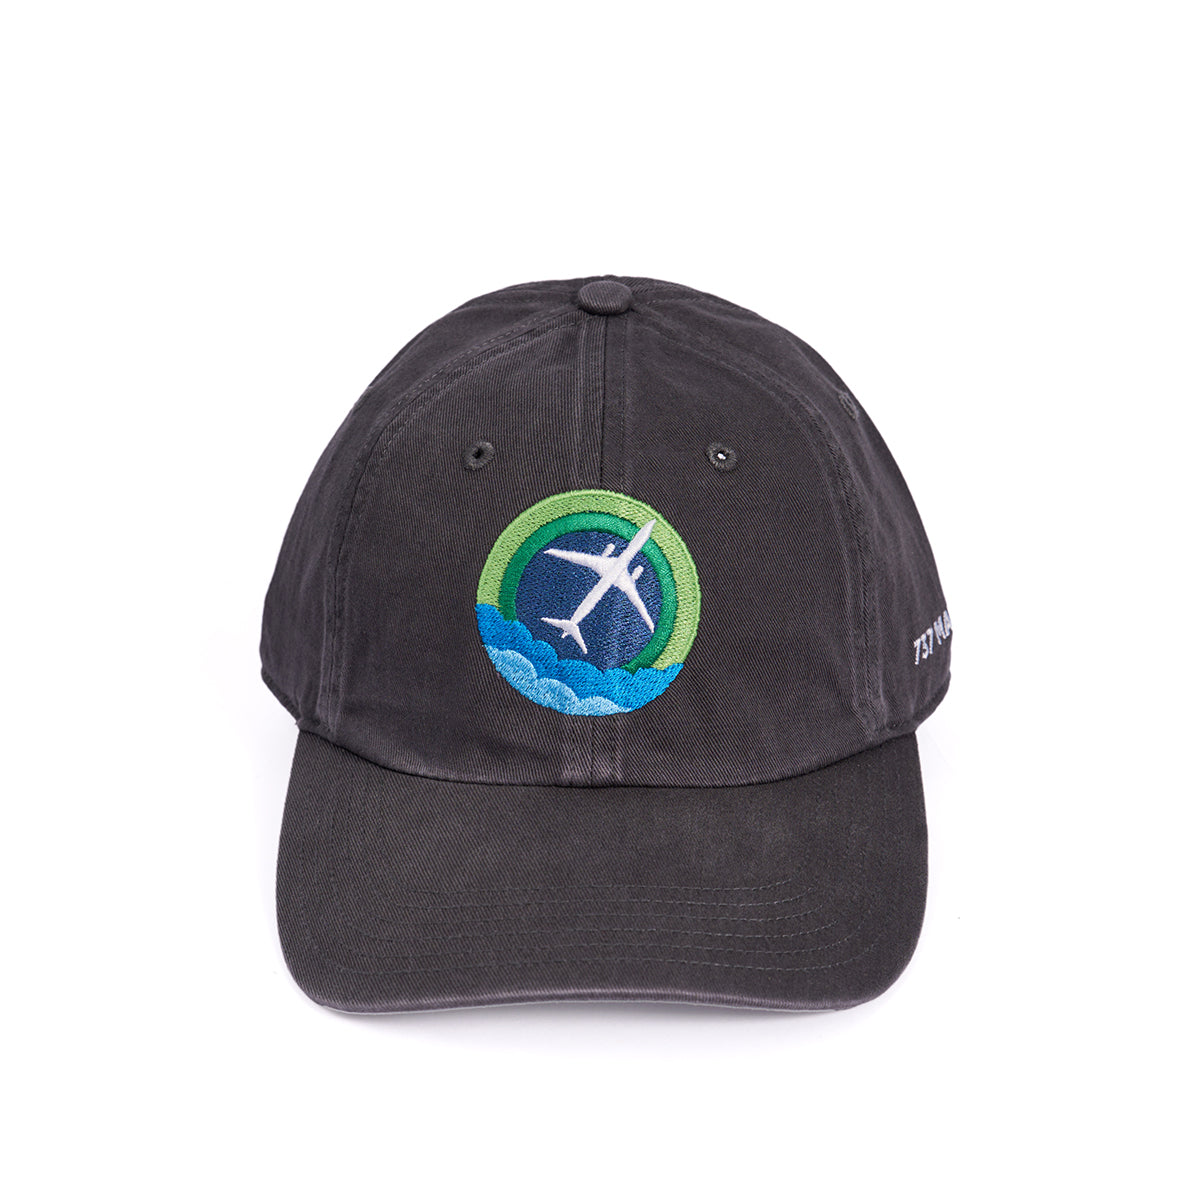 Skyward hat, featuring the iconic Boeing 737 MAX embroidered in a roundel design on the front.